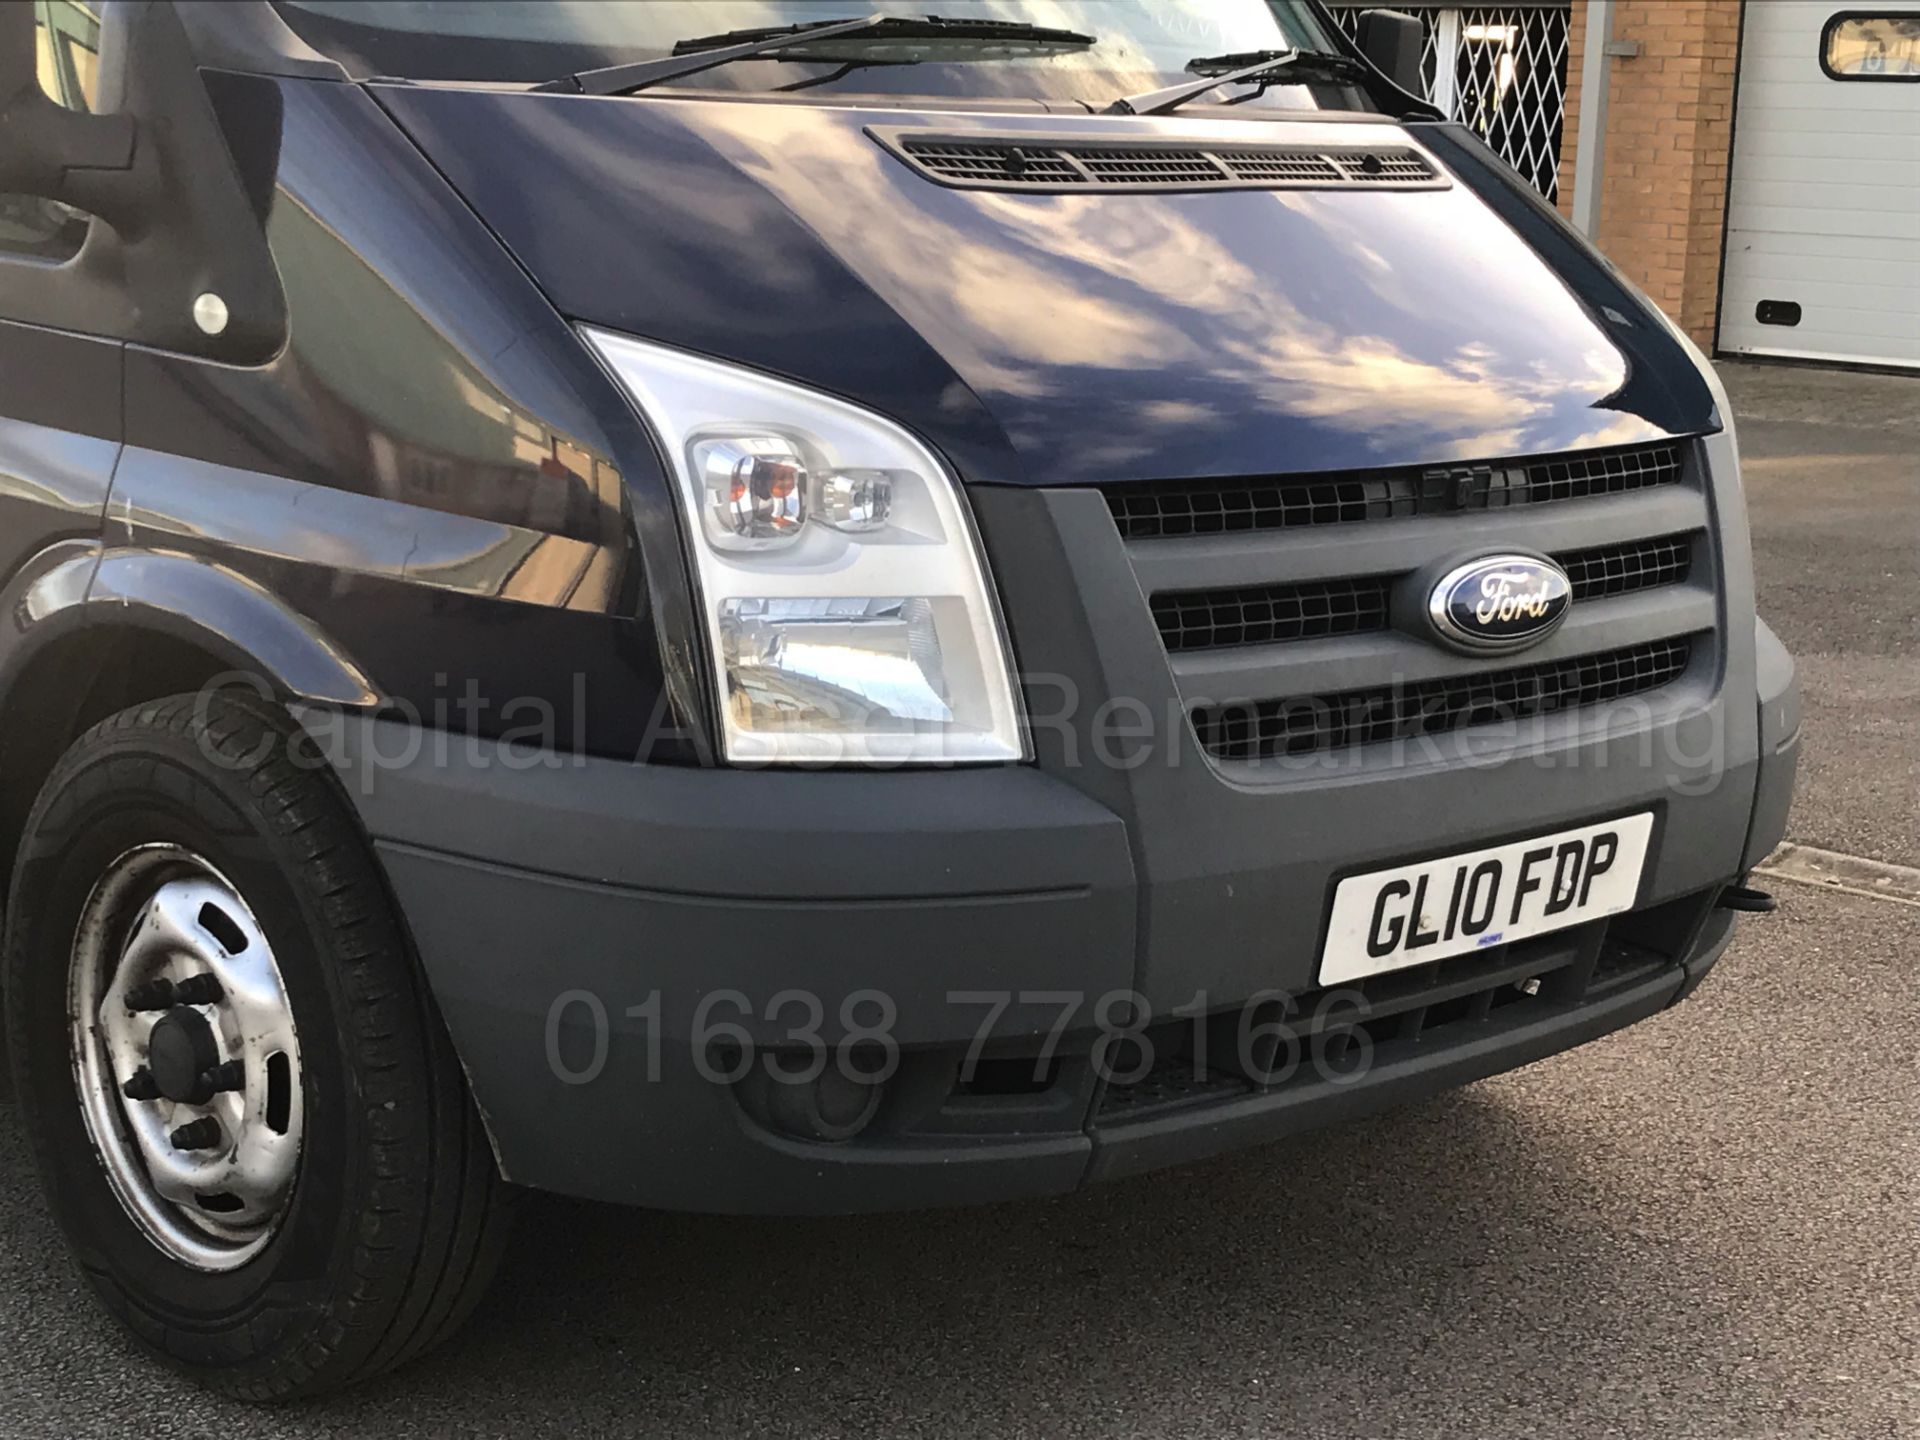 FORD TRANSIT 100 T350 '15 SEATER MINI-BUS' (2010 - 10 REG) '2.4 TDCI - 100 BHP - 5 SPEED' *AIR CON* - Image 11 of 28